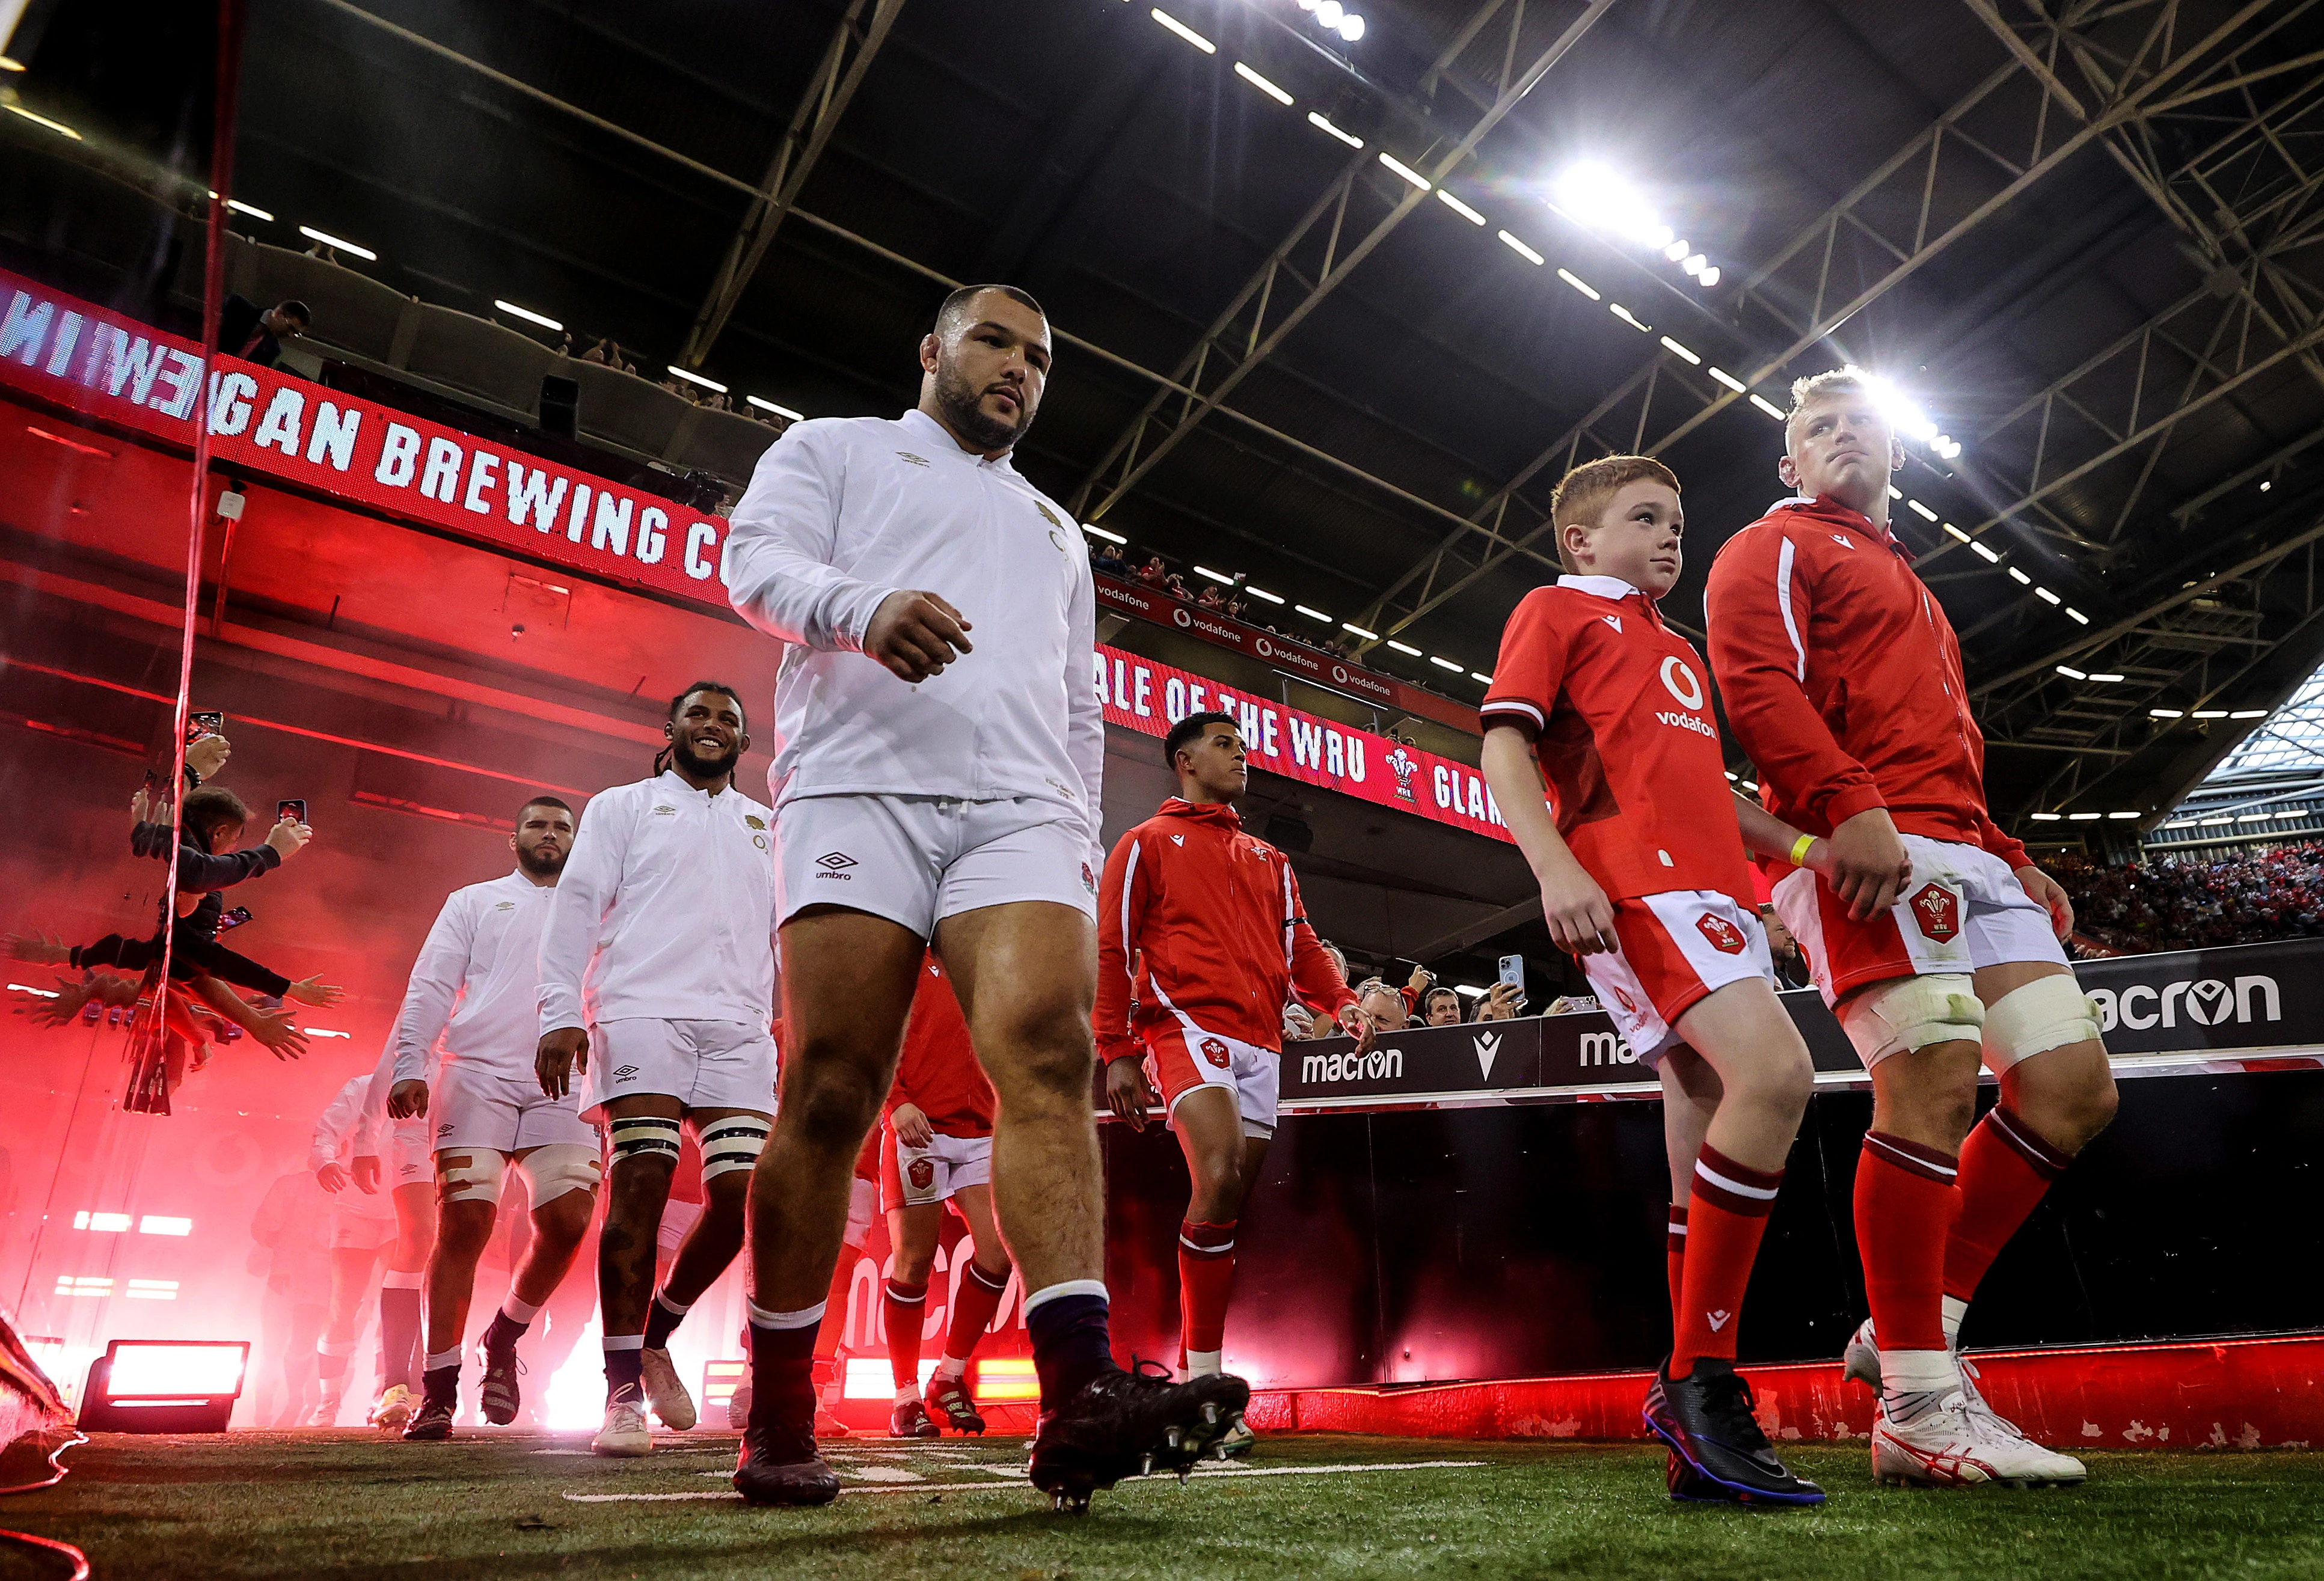 tunnel stand off 2015 Wales england